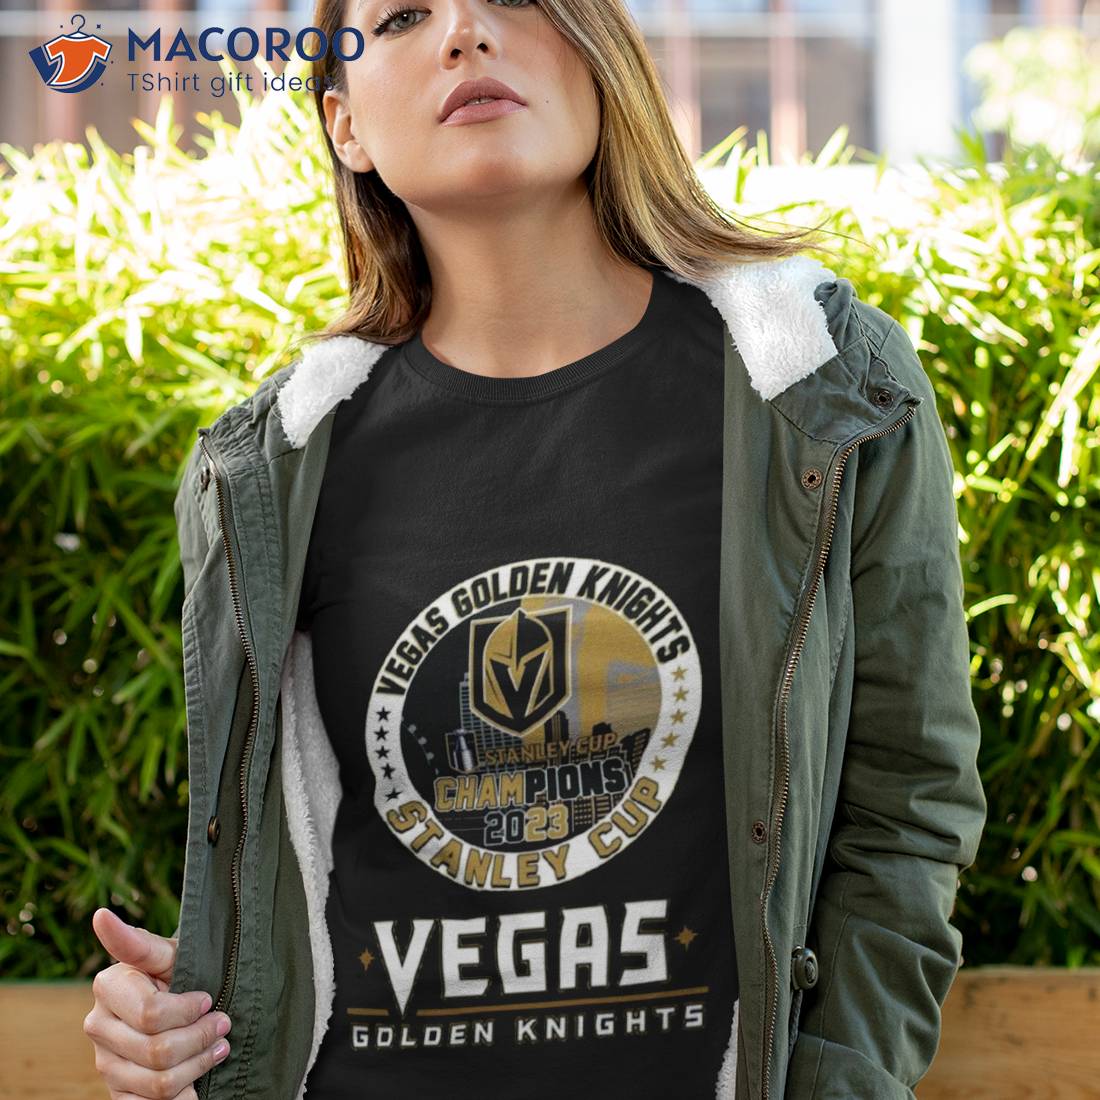 https://images.macoroo.com/wp-content/uploads/2023/06/vegas-golden-knights-stanley-cup-champions-2023-first-time-champions-gold-shirt-tshirt-4.jpg